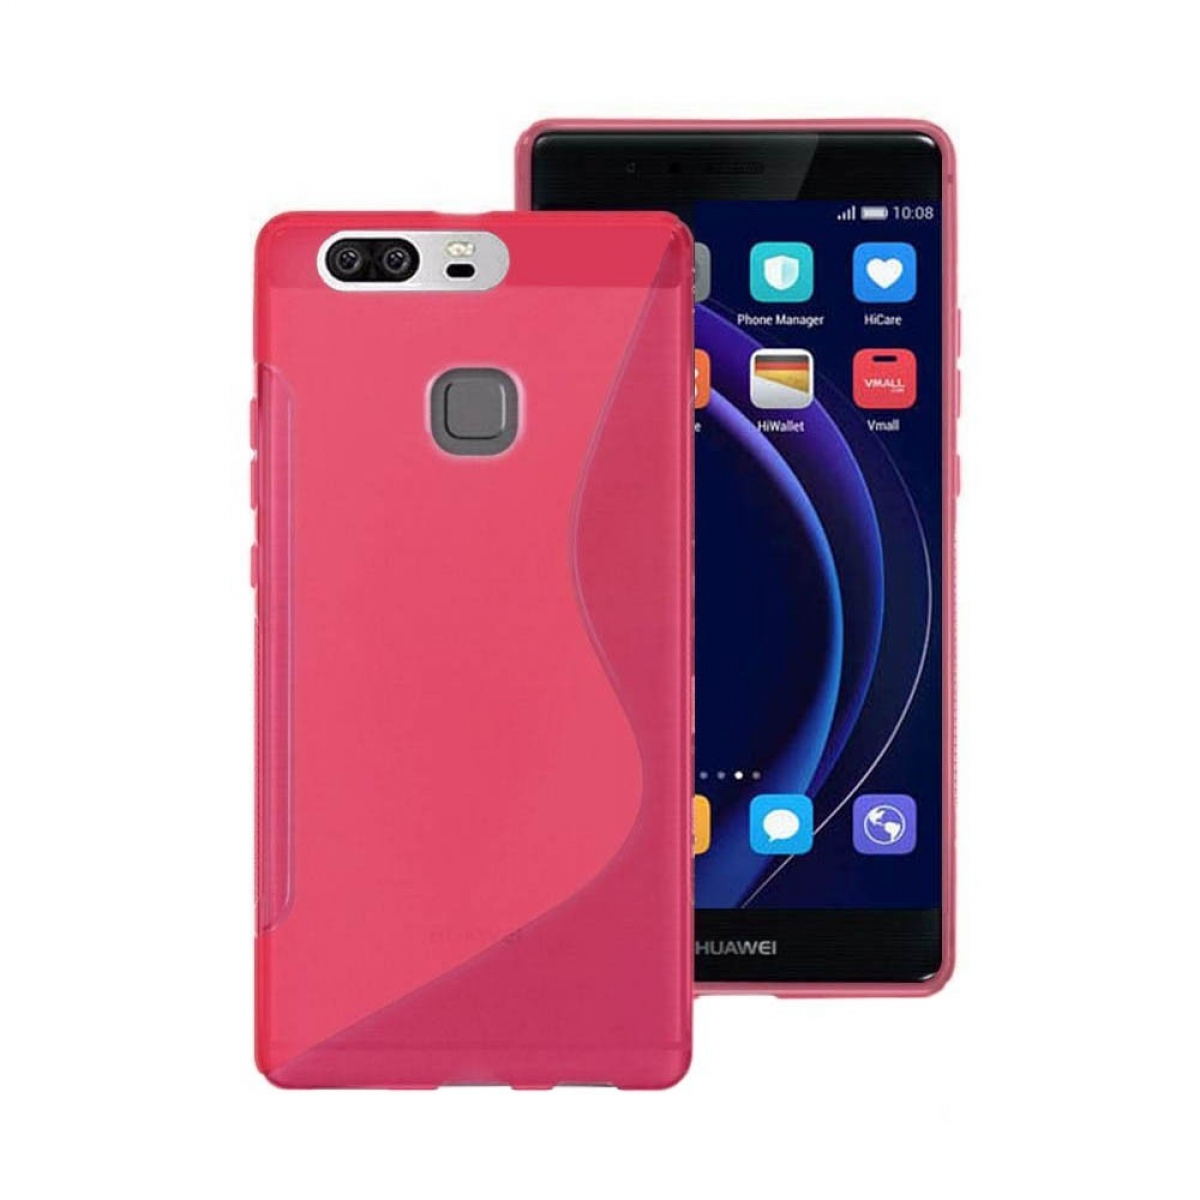 Backcover, Huawei, Honor Pink, CASEONLINE 8, - Multicolor S-Line